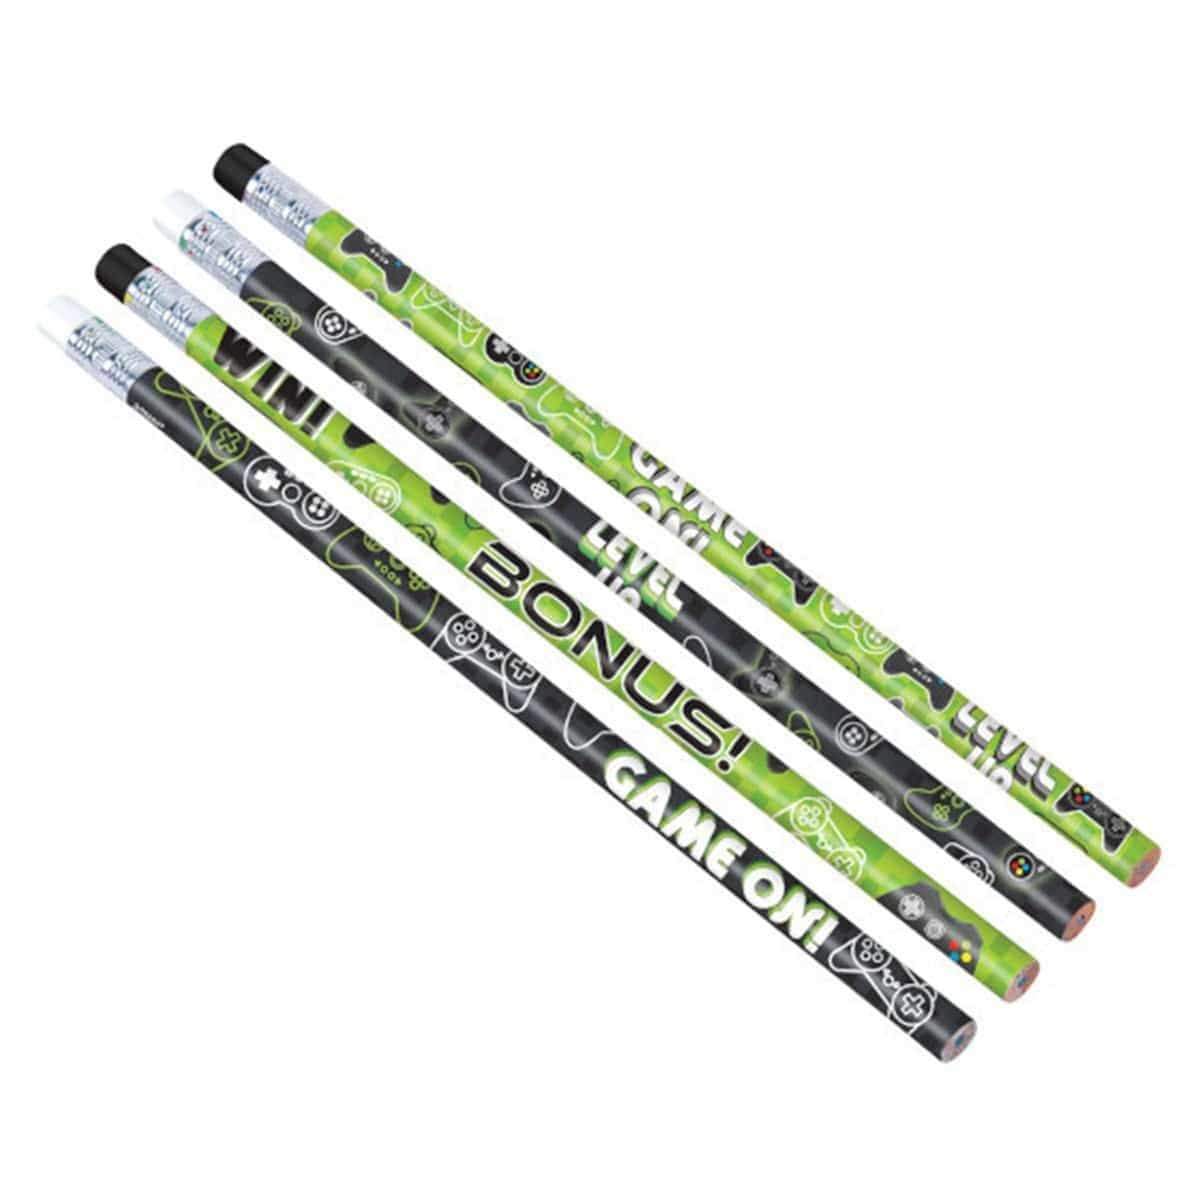 Buy Kids Birthday Level Up pencils, 8 per package sold at Party Expert